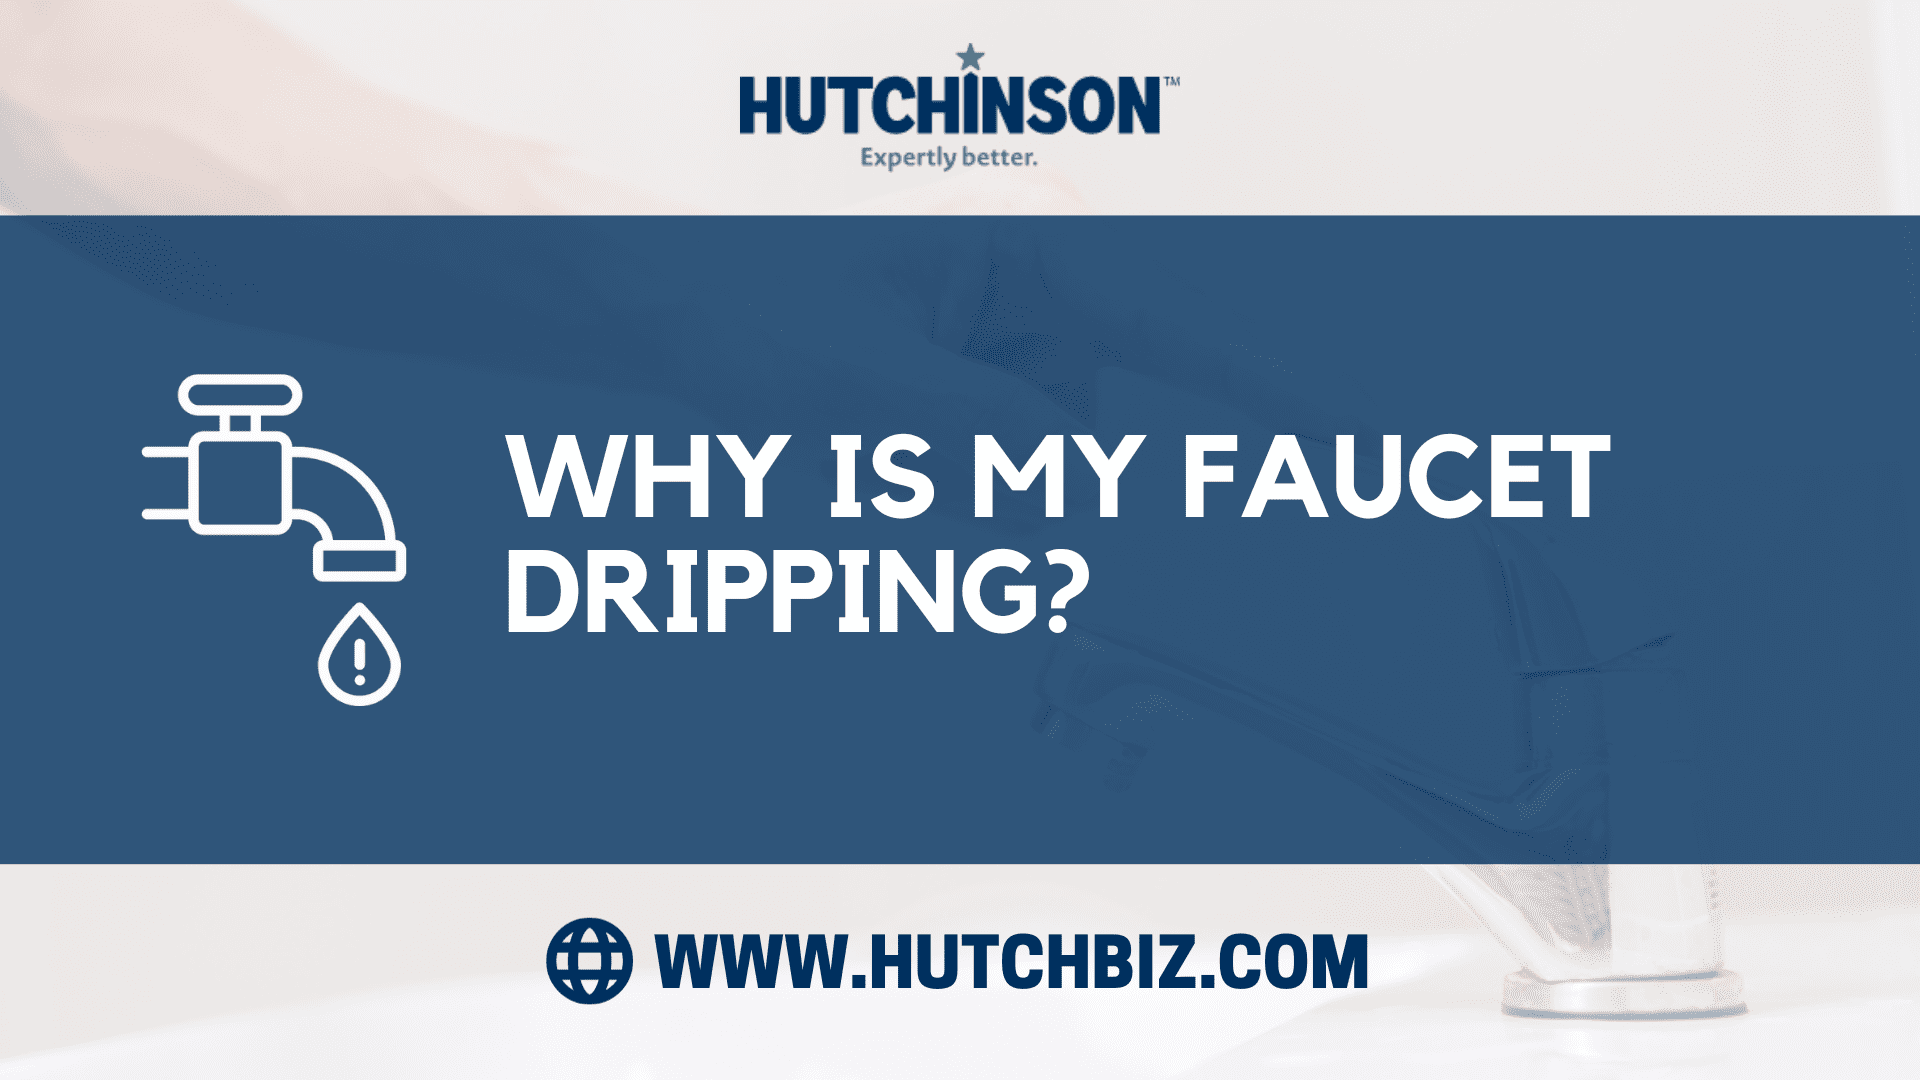 Why Is My Faucet Dripping?